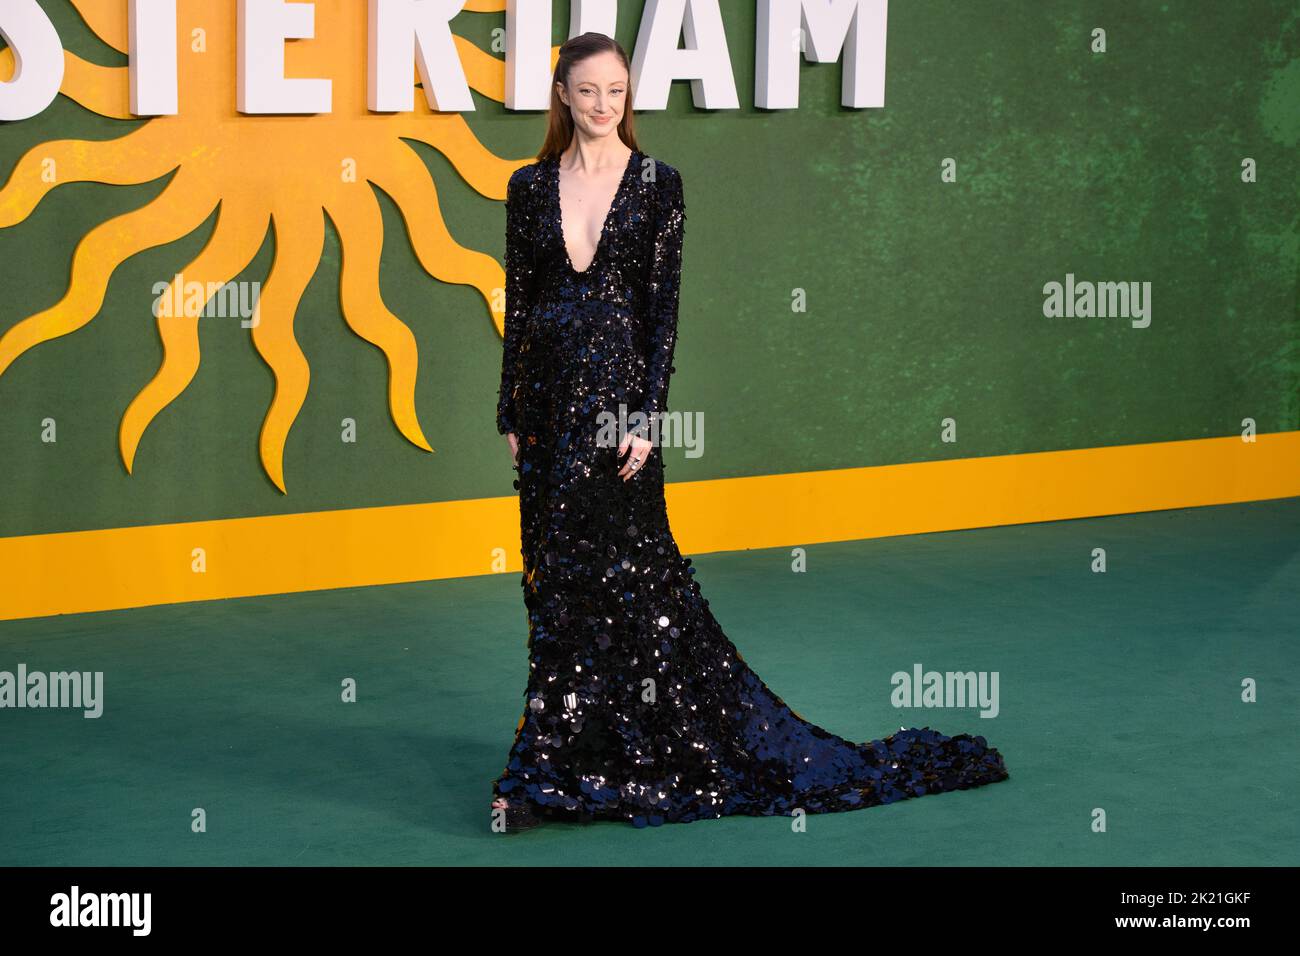 London, UK. 21 September 2022. Andrea Riseborough attending the European premiere of Amsterdam at the Odeon Luxe Leicester Square Cinema, London Picture date: Thursday September 21, 2022. Photo credit should read: Matt Crossick/Empics/Alamy Live News Stock Photo